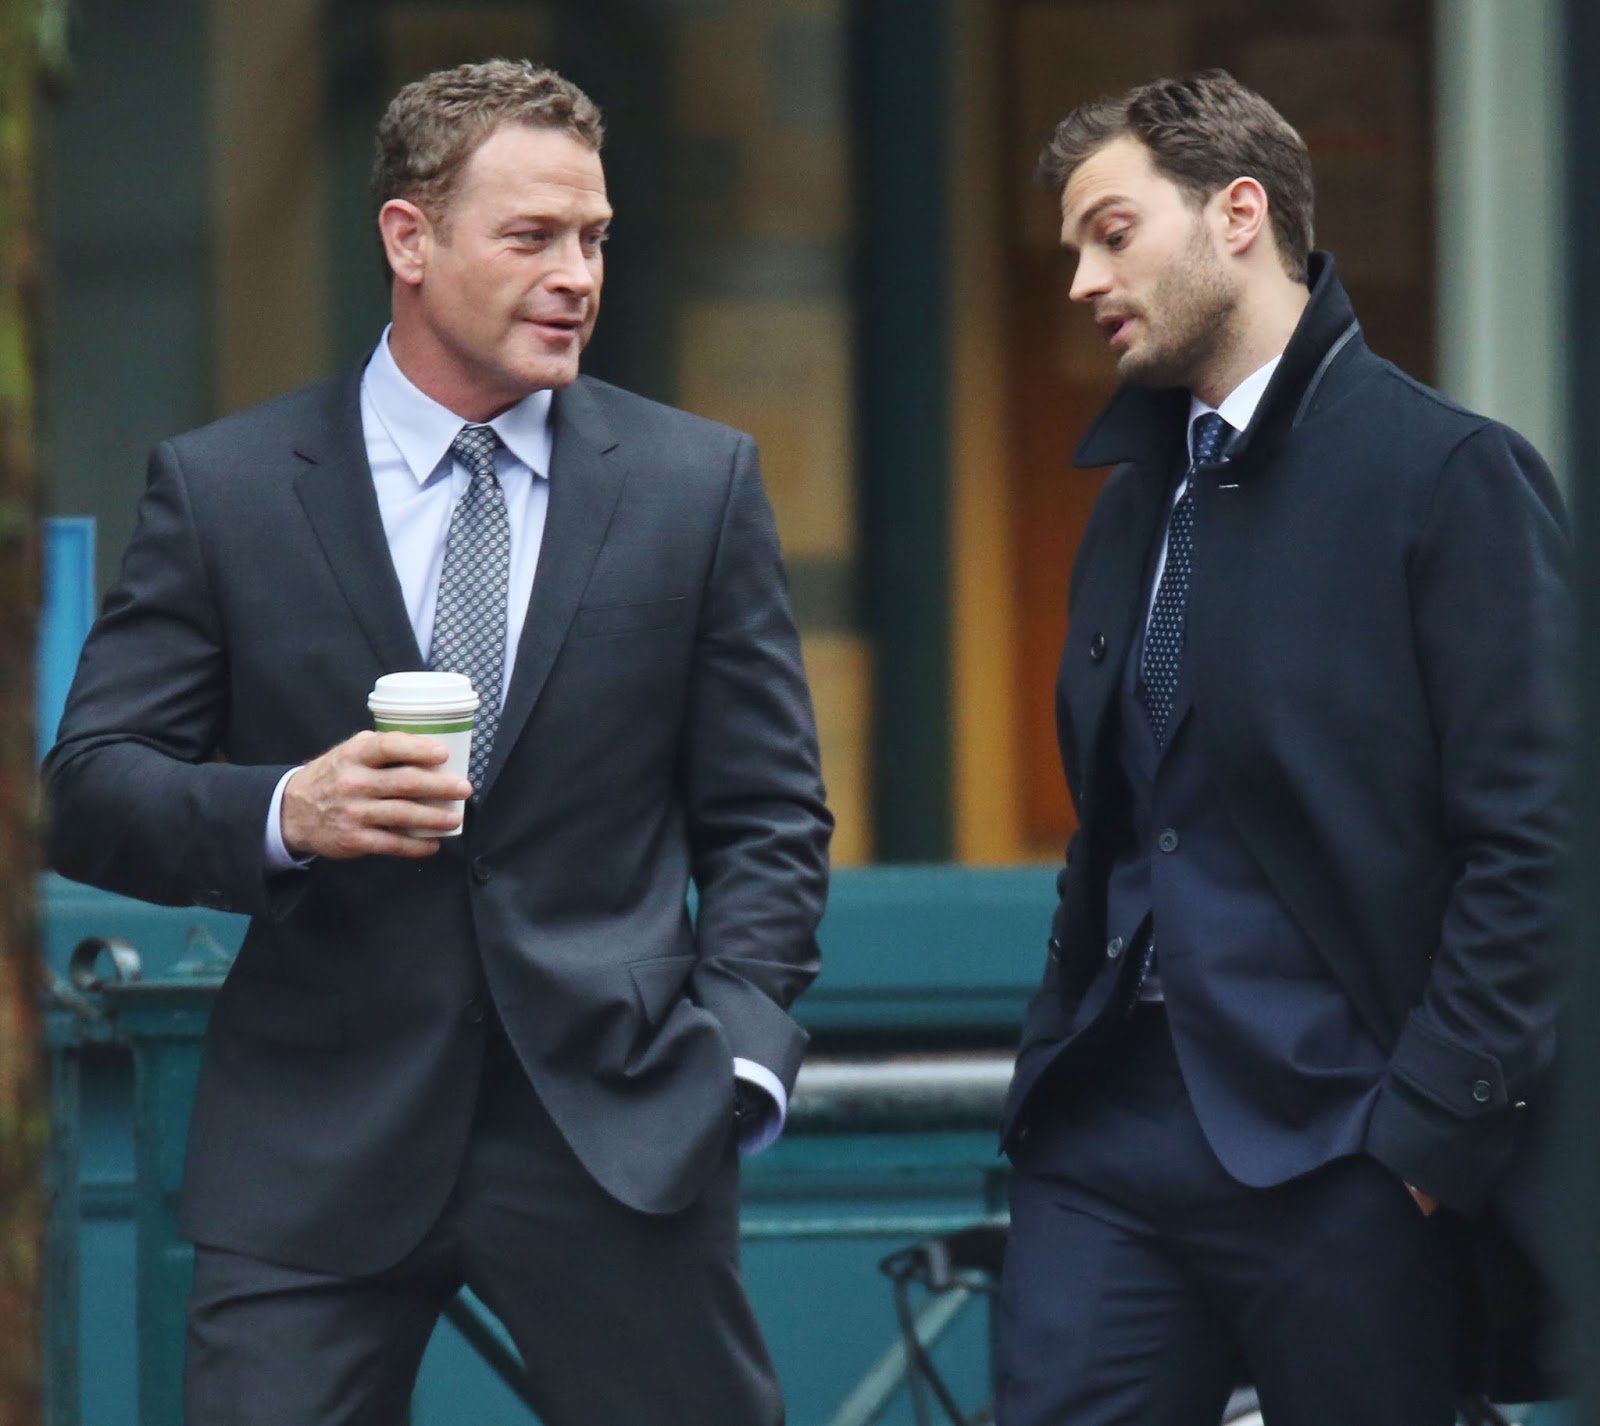 Wishing a very Happy 49th Birthday to actor Max Martini, shown here with Jamie.  